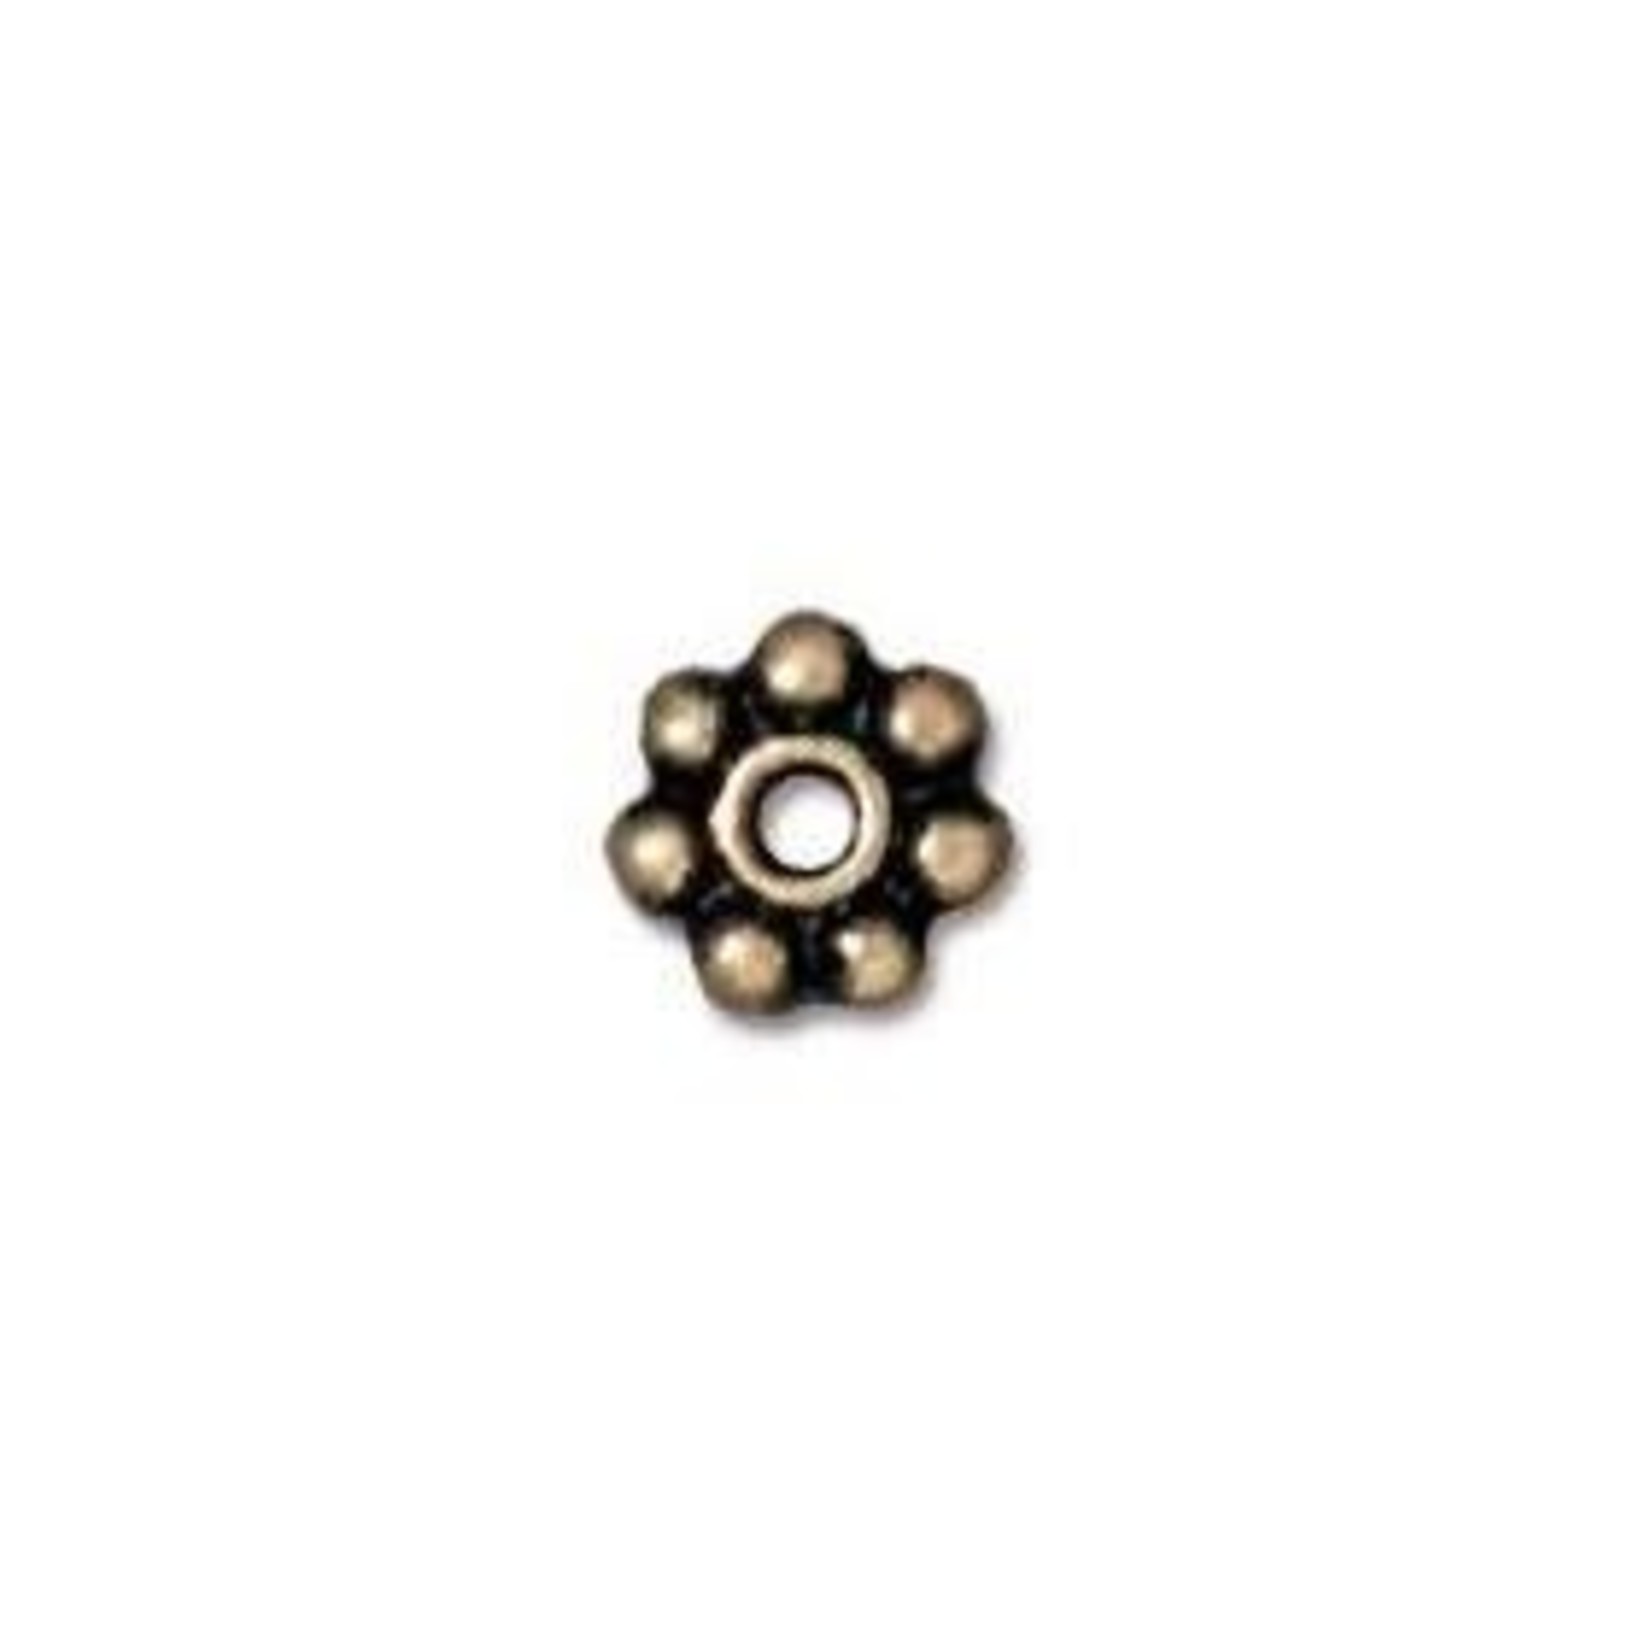 Beaded  4mm Daisy Spacer Bead Brass Oxide Plated - Single